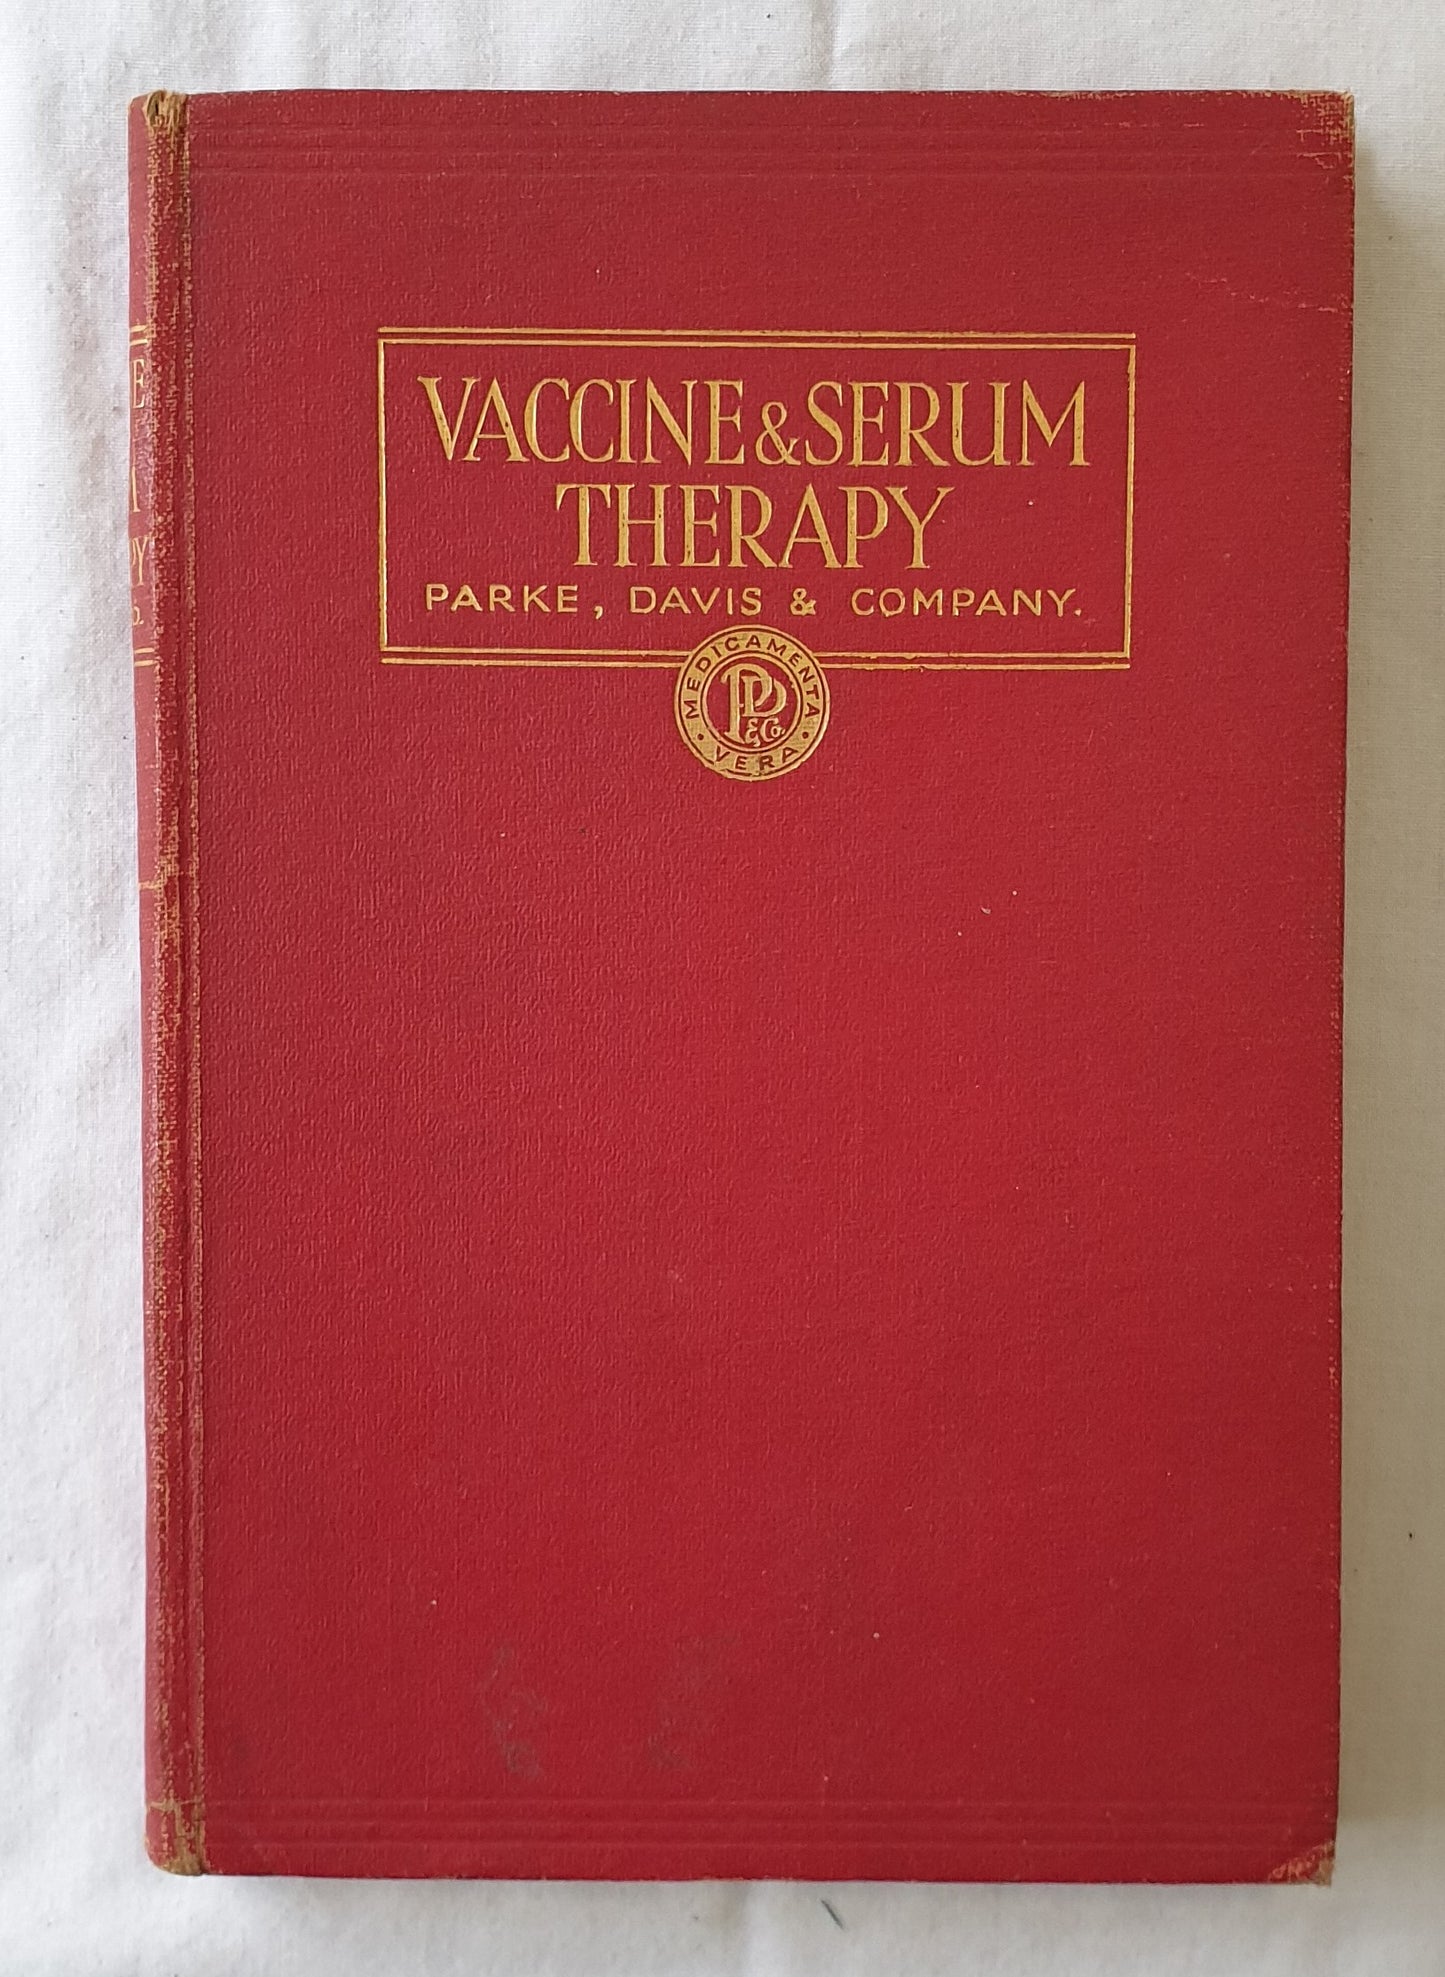 Vaccine & Serum Therapy  by Inoculation Department of St. Mary’s Hospital, London